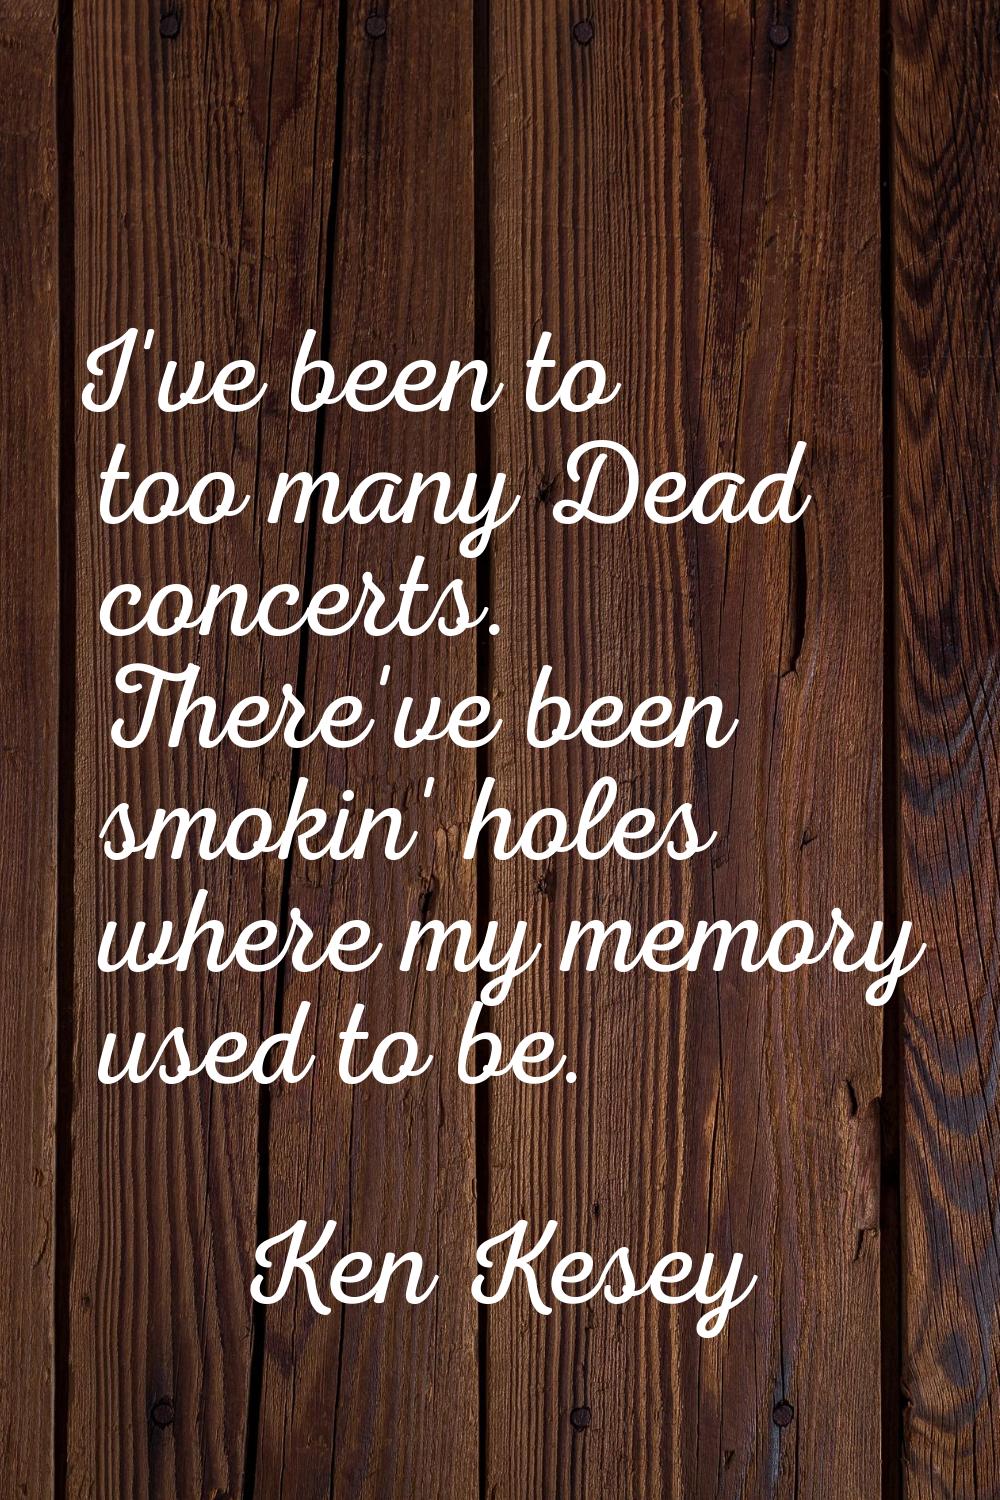 I've been to too many Dead concerts. There've been smokin' holes where my memory used to be.